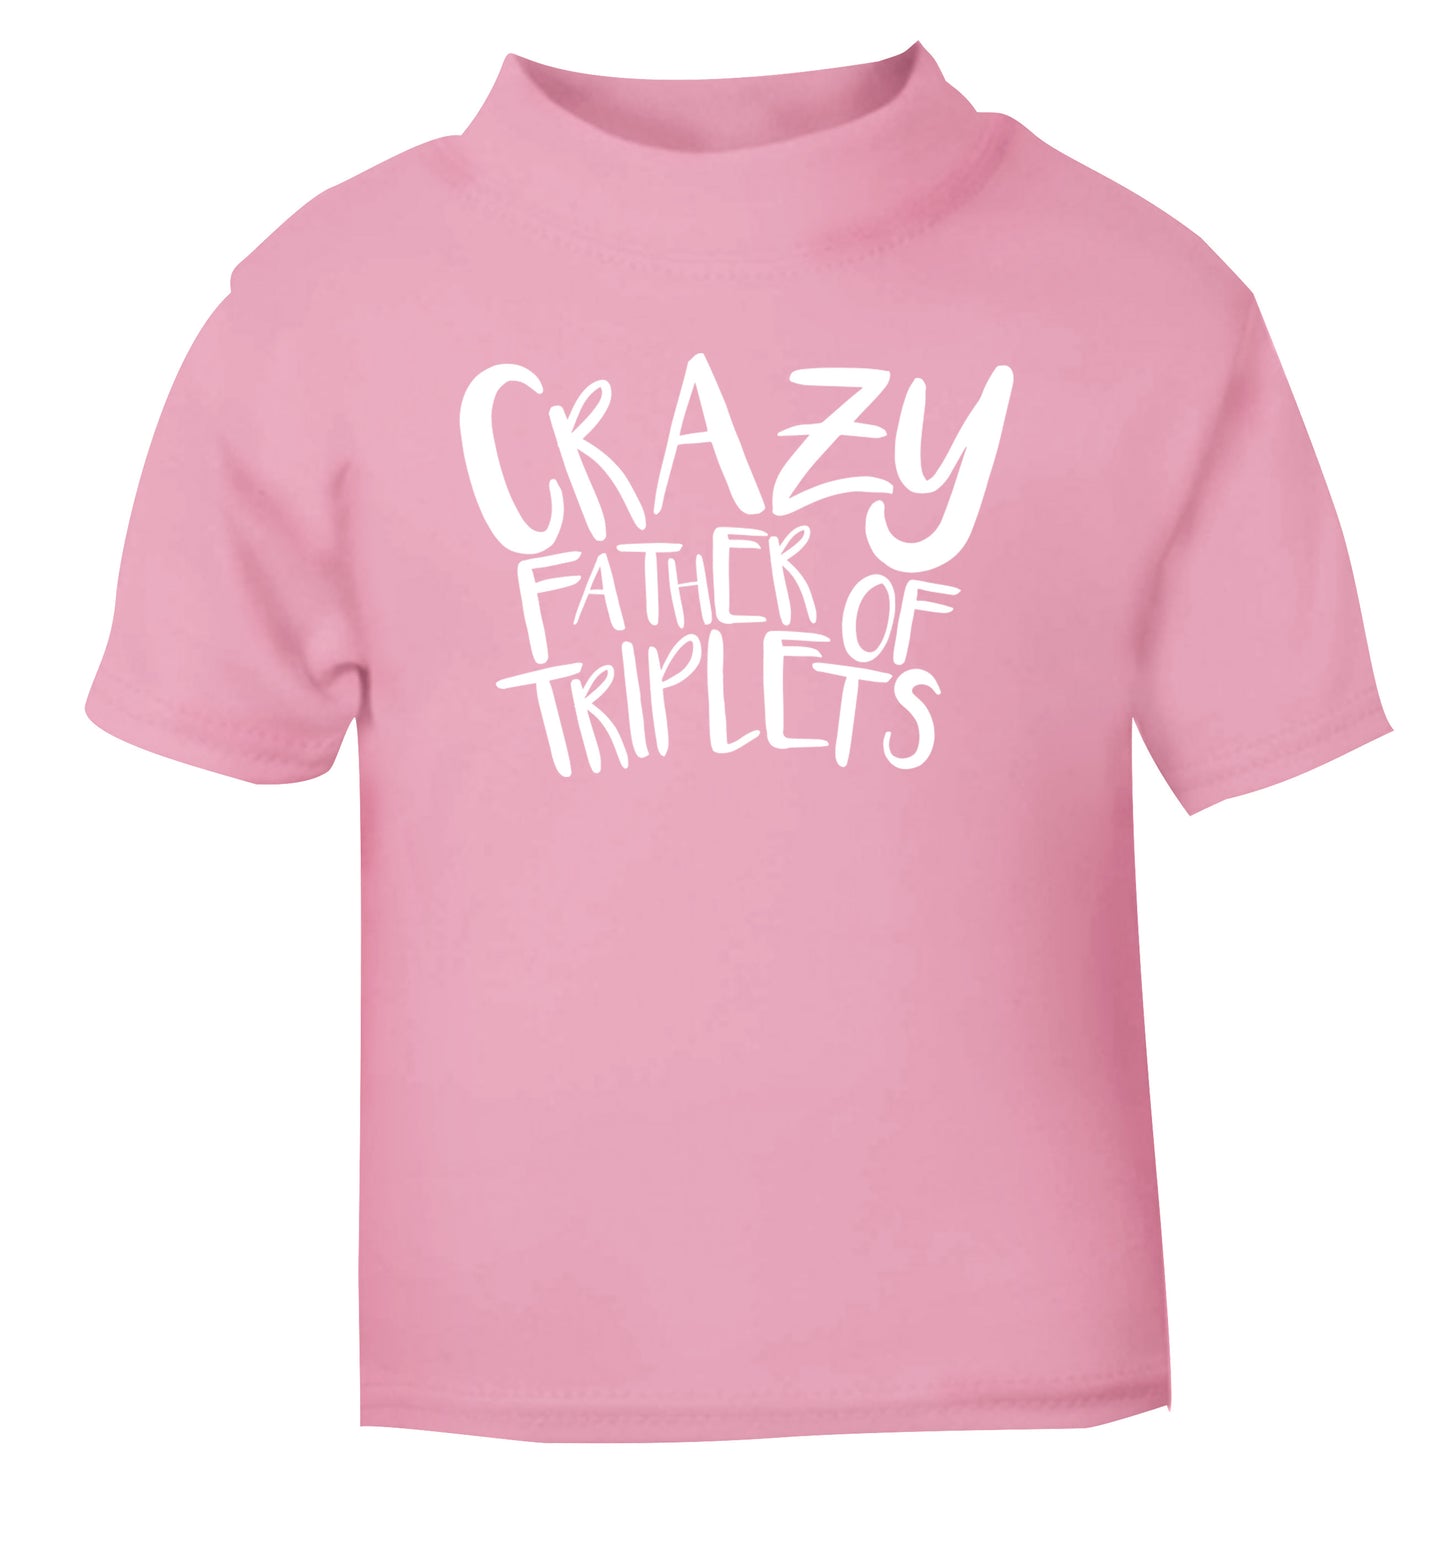 Crazy father of triplets light pink Baby Toddler Tshirt 2 Years